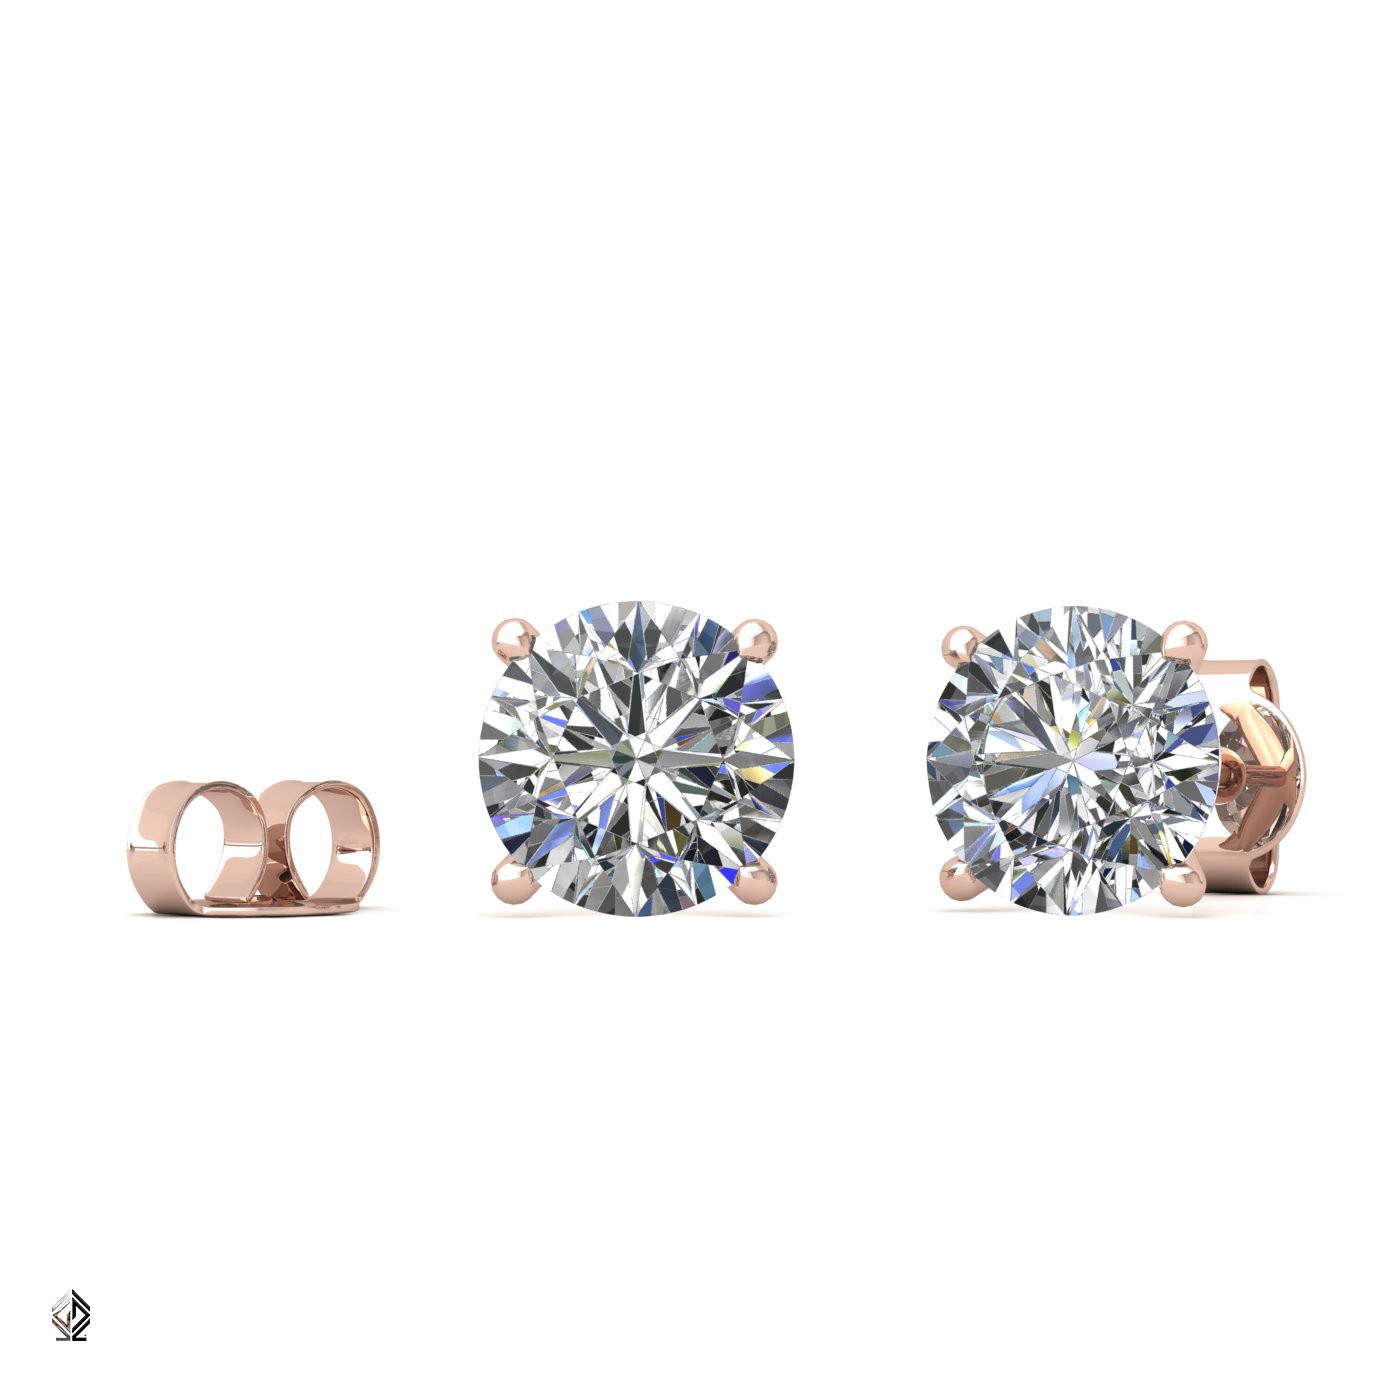 18k rose gold 2.0 ct each (4,0 tcw) 4 prongs round cut classic diamond earring studs Photos & images